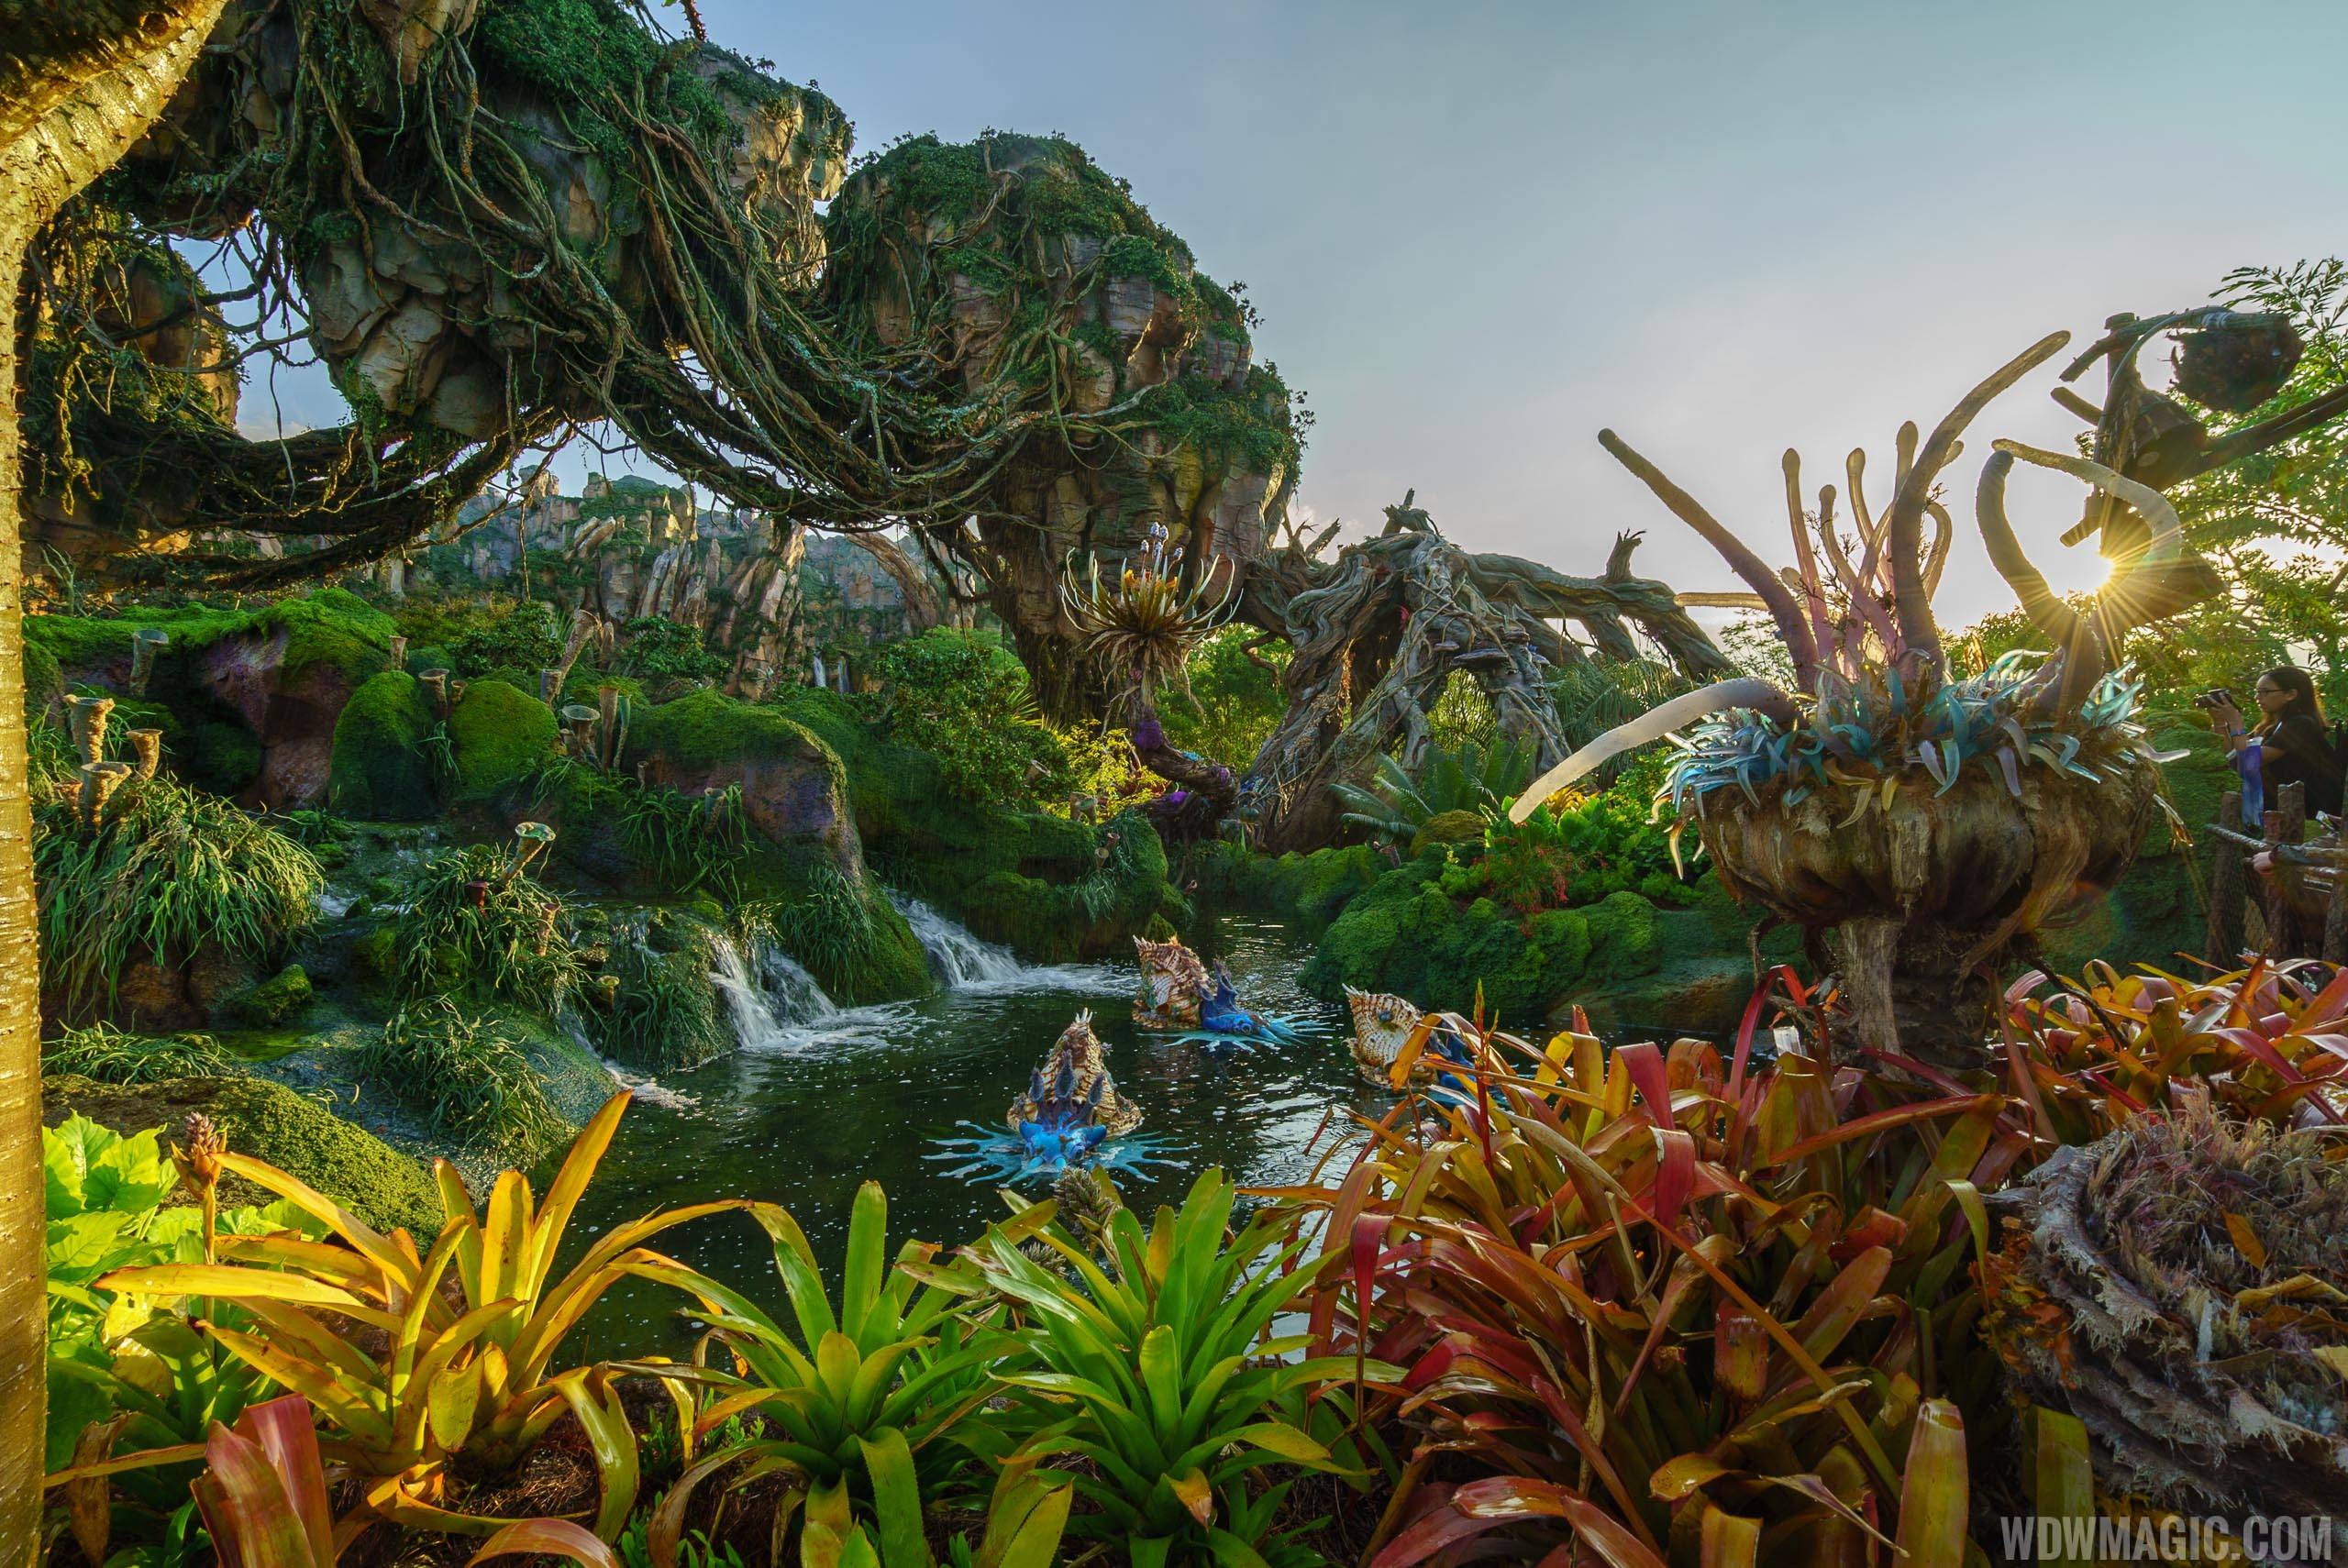 394655 avatar frontiers of pandora game scenery 4k pc  Rare Gallery HD  Wallpapers